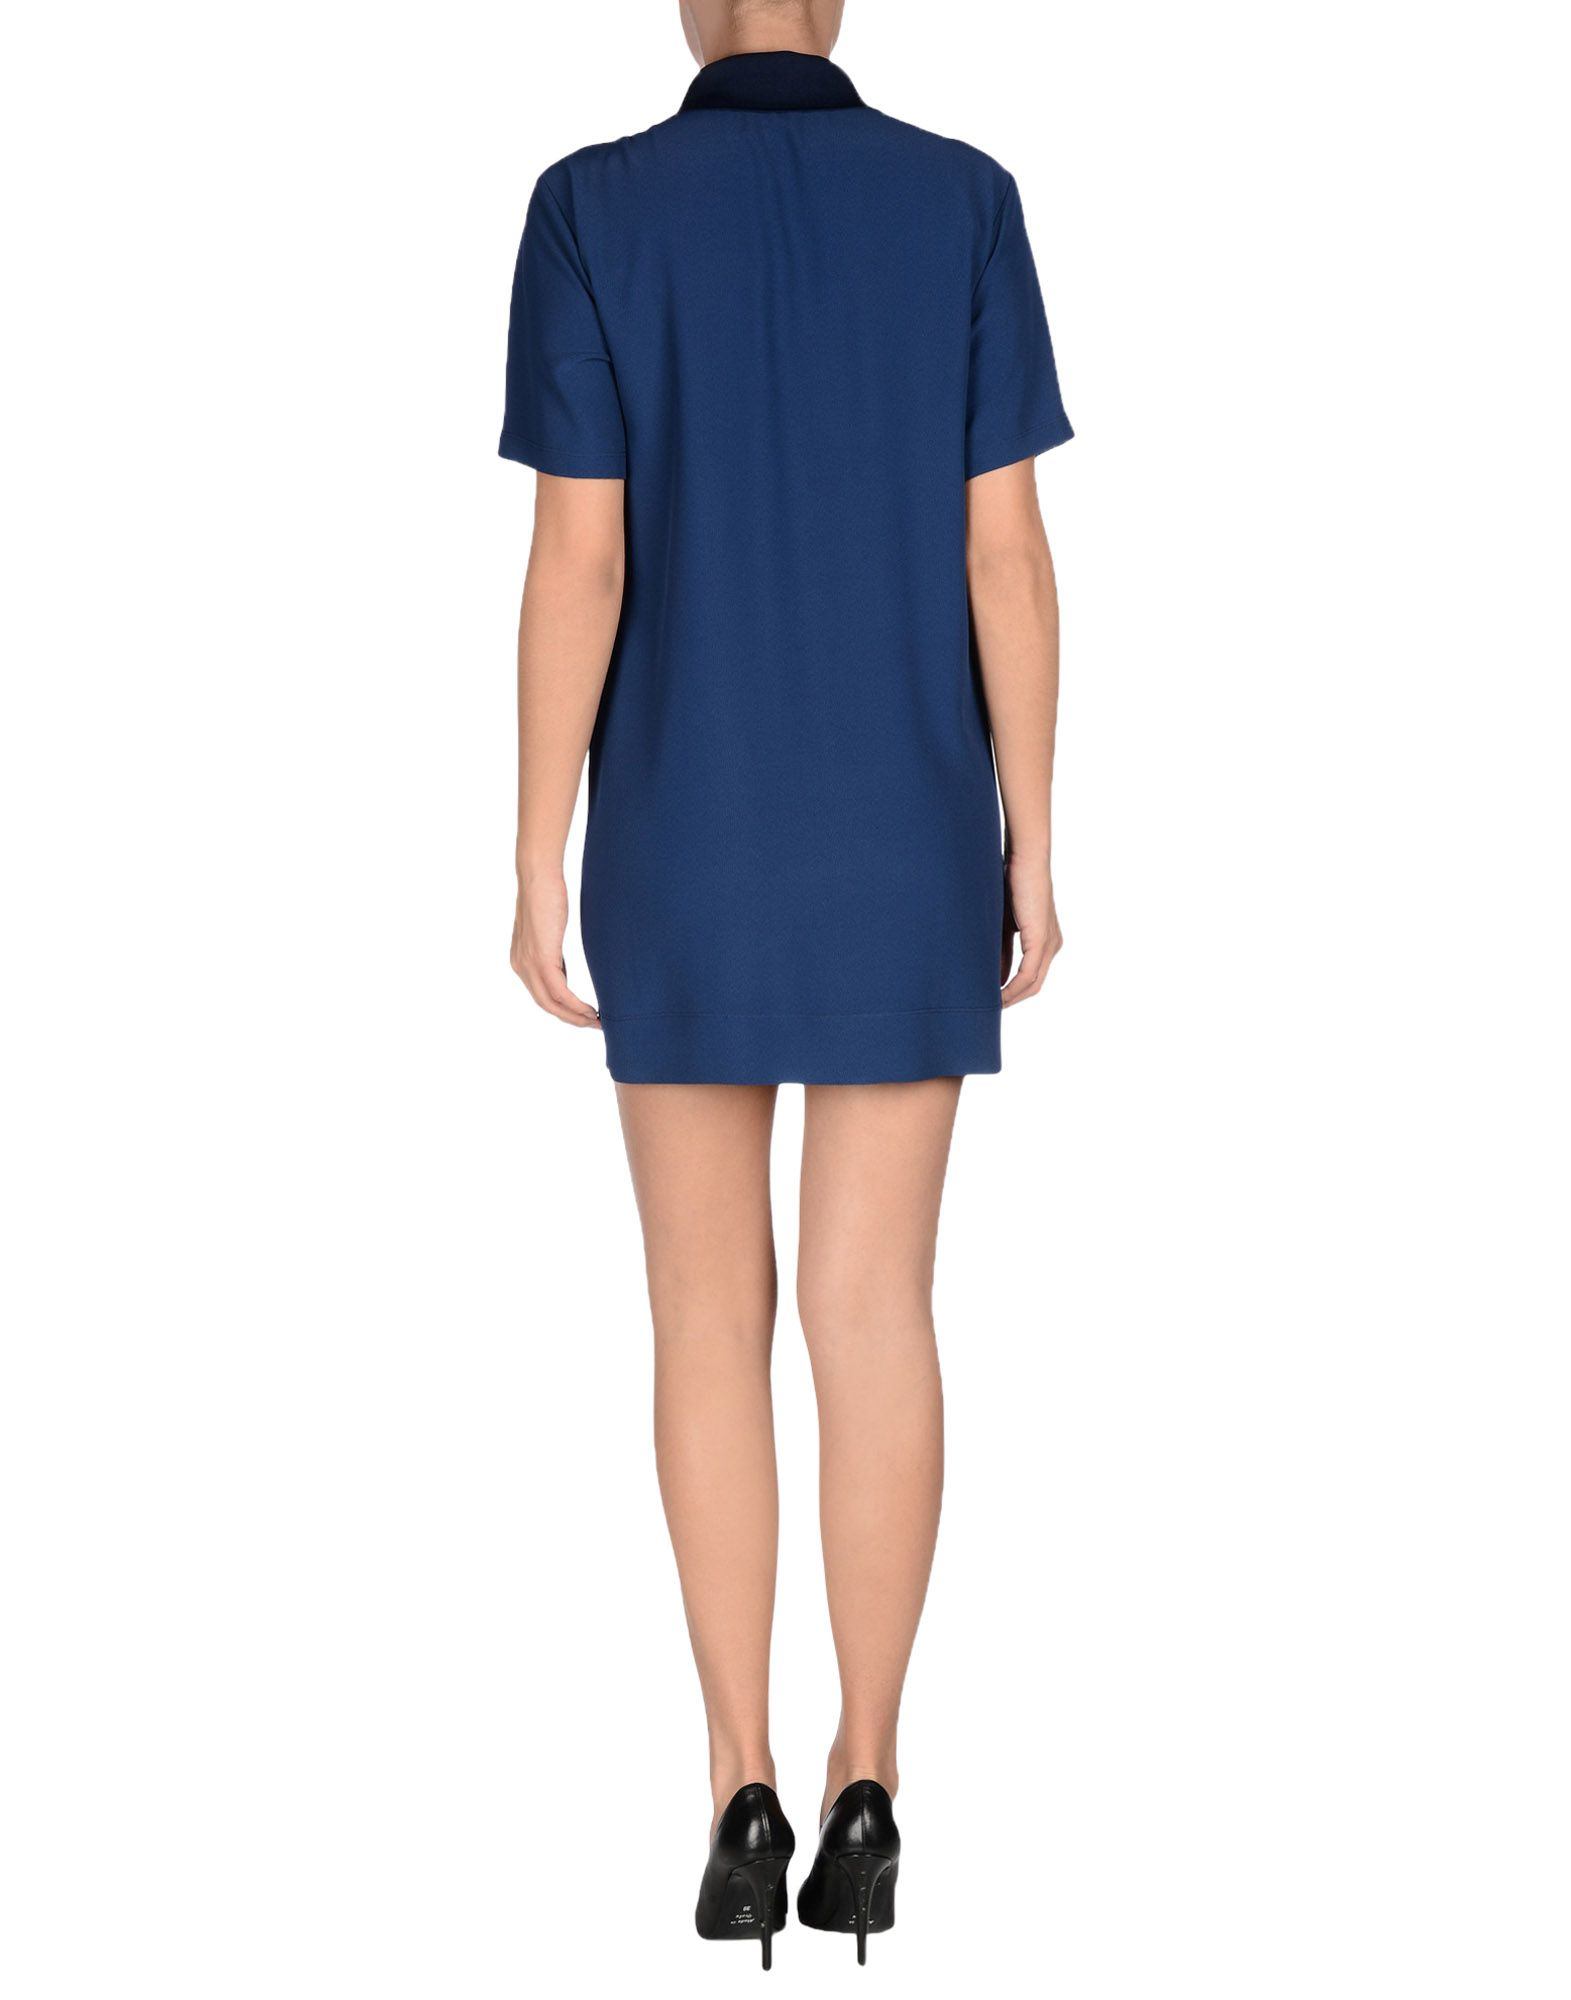 Mauro Grifoni Synthetic Short Dress in Dark Blue (Blue) - Lyst